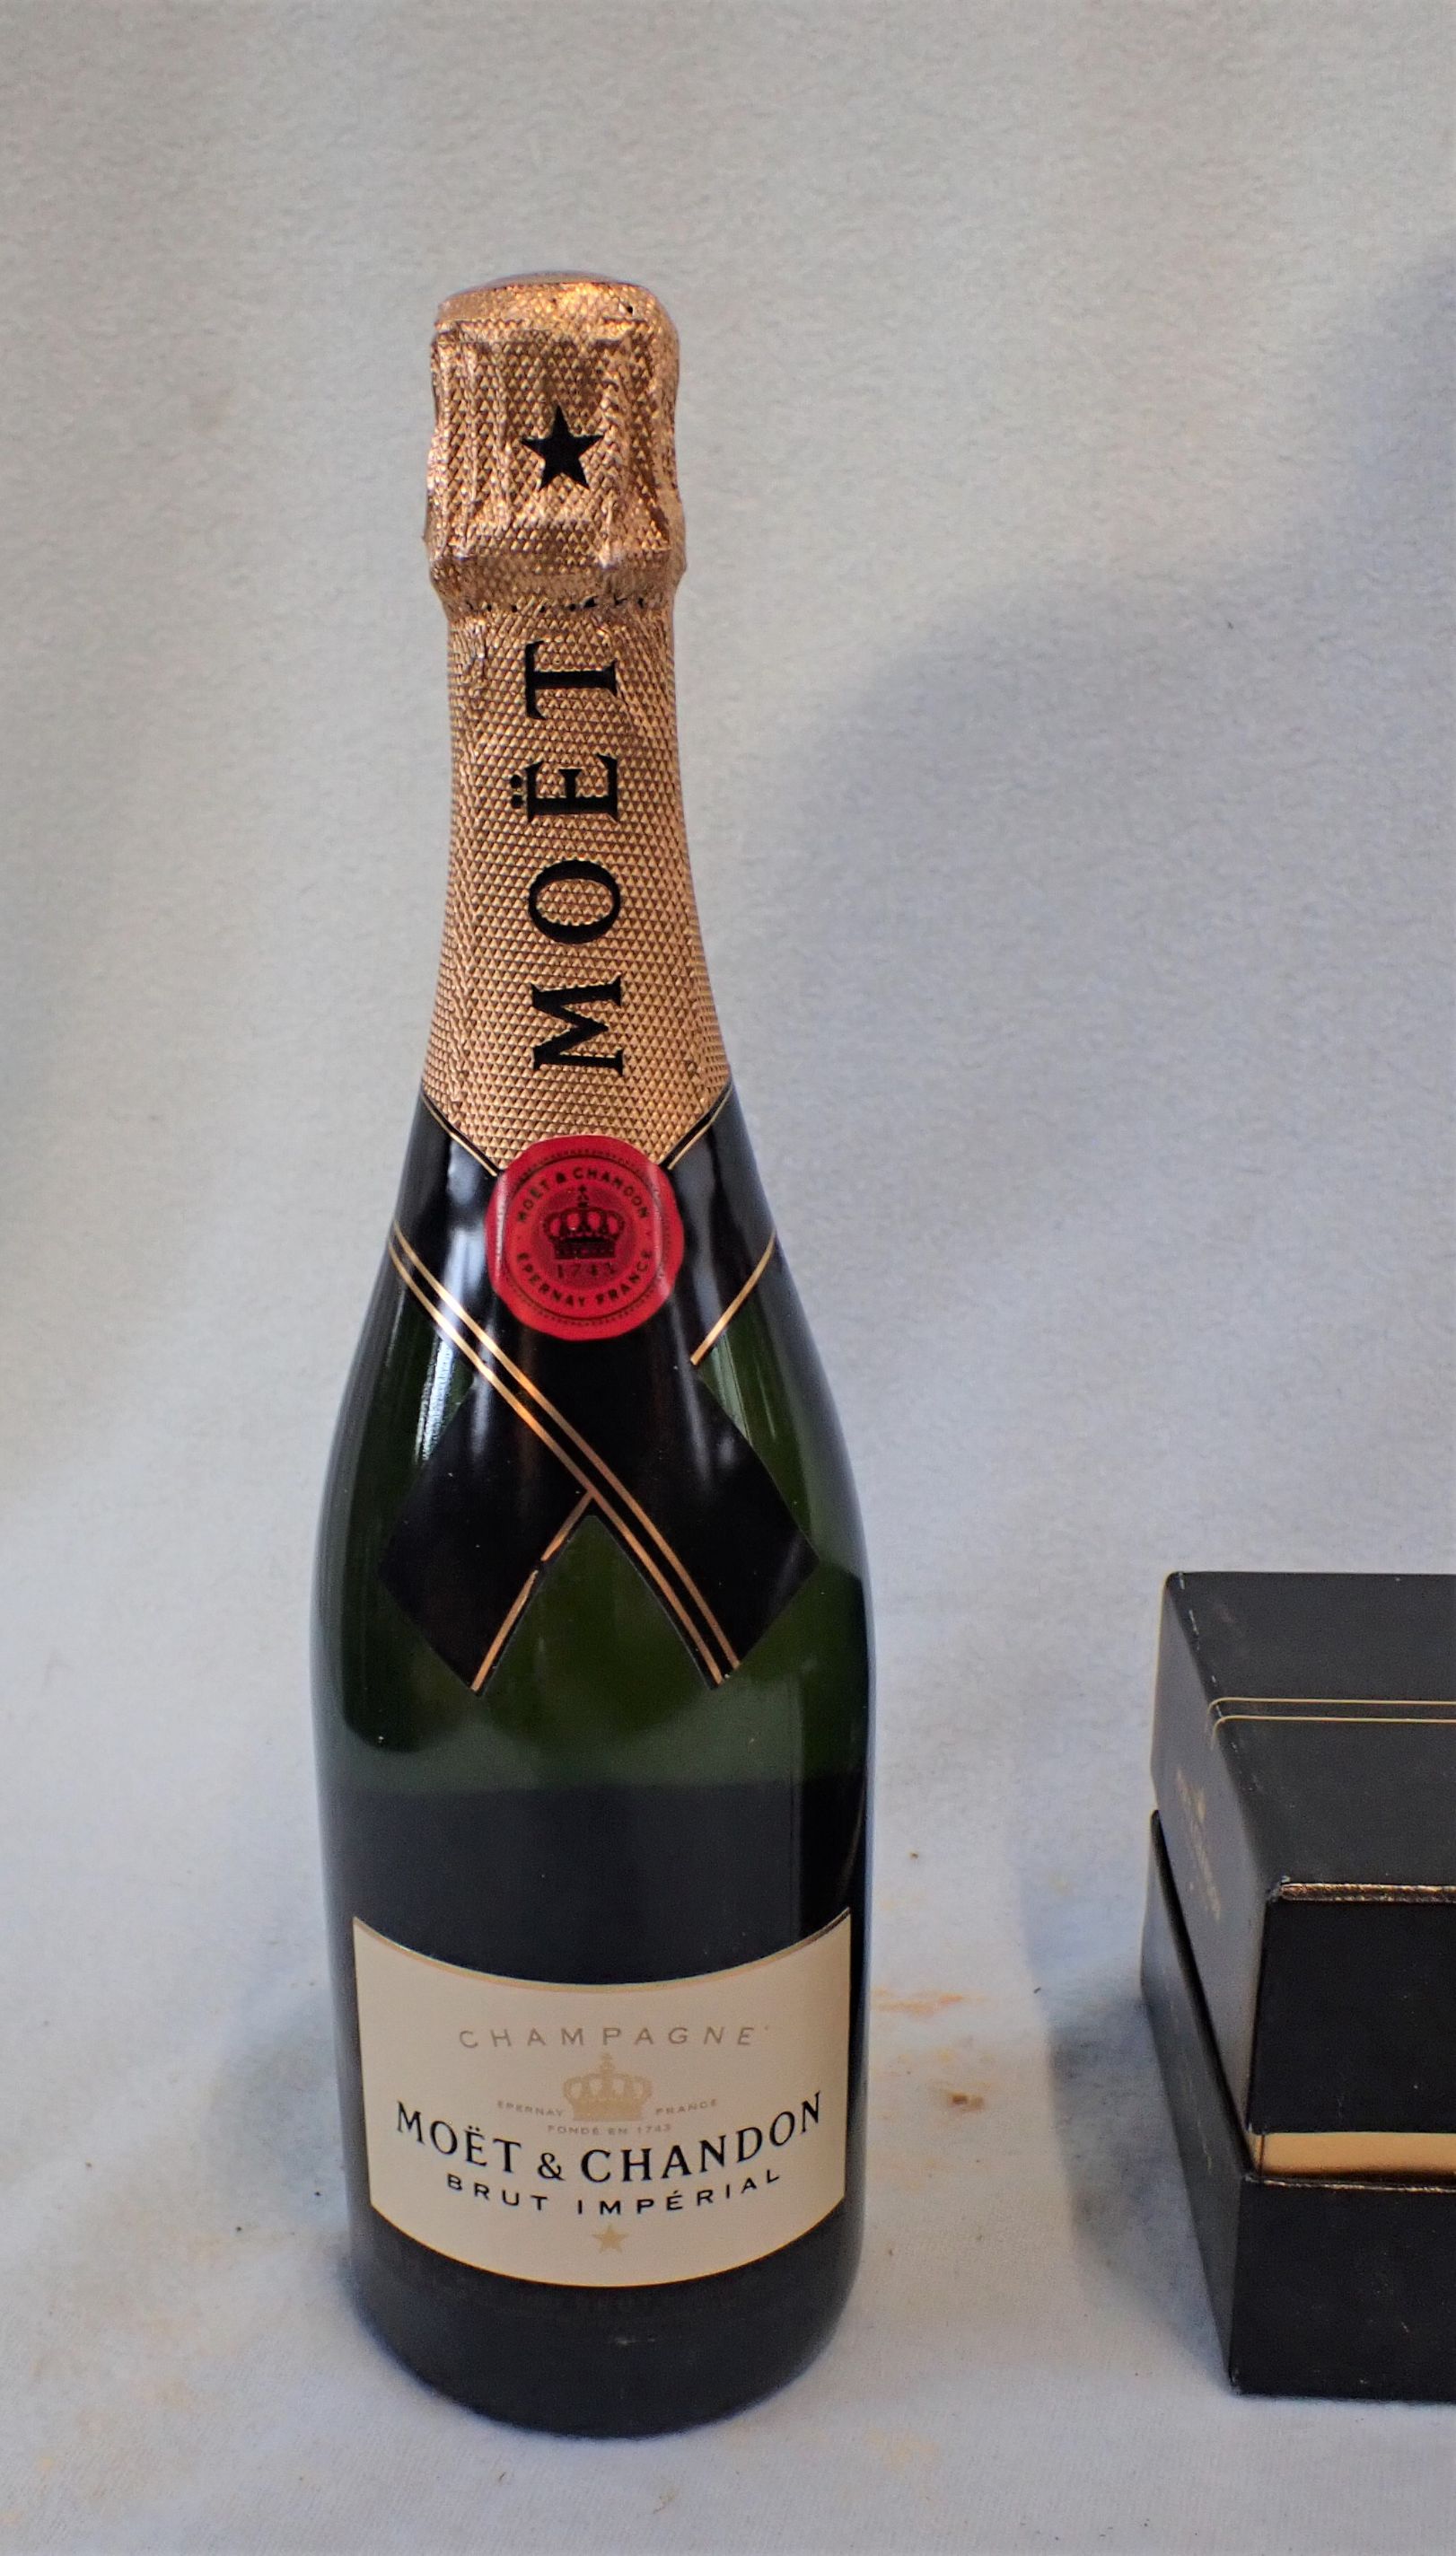 A 'MOET & CHANDON CHAMPAGNE GRAND VINTAGE 2003' WITH A 'MOET & CHANDON CHAMPAGNE BRUT IMPERIAL' - Image 3 of 3